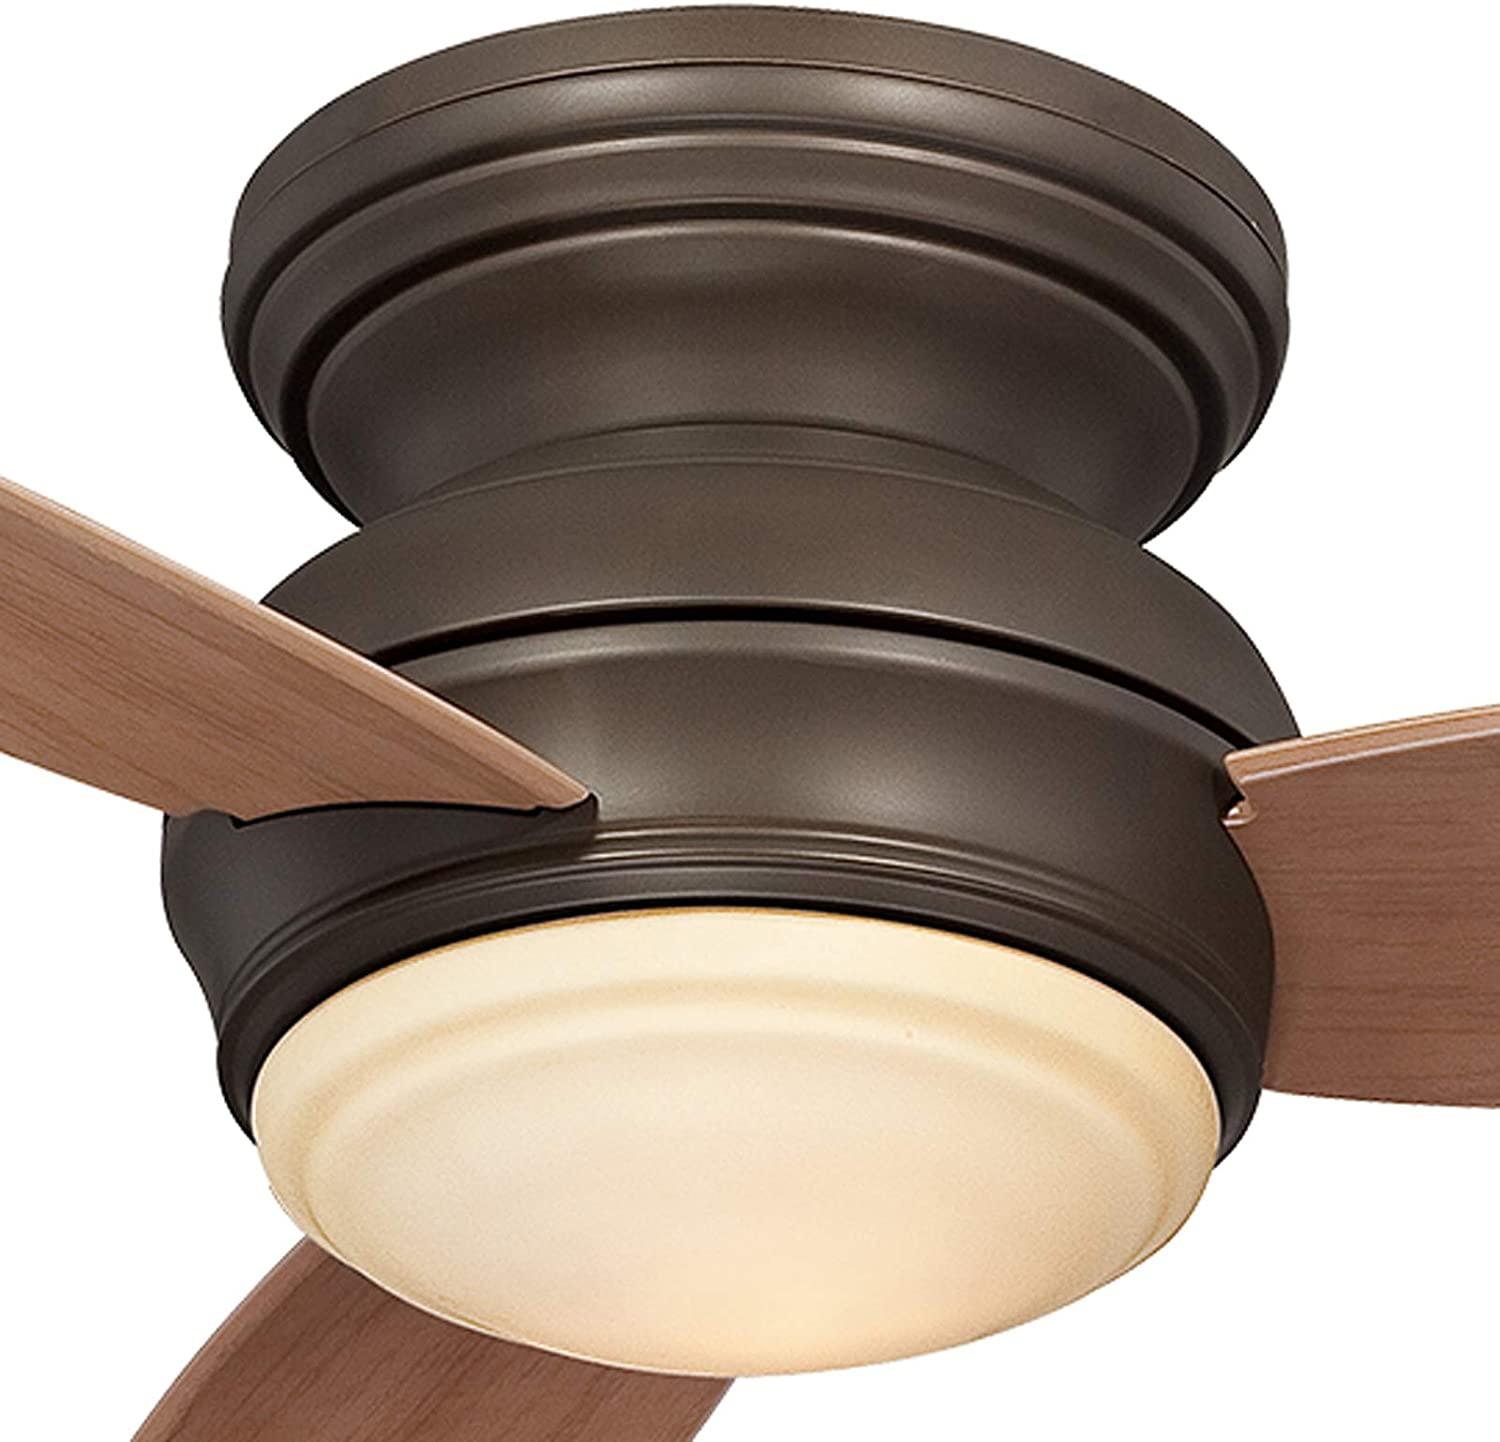 Traditional Concept 44 Inch Outdoor Ceiling Fan With Light, Wall Control Included